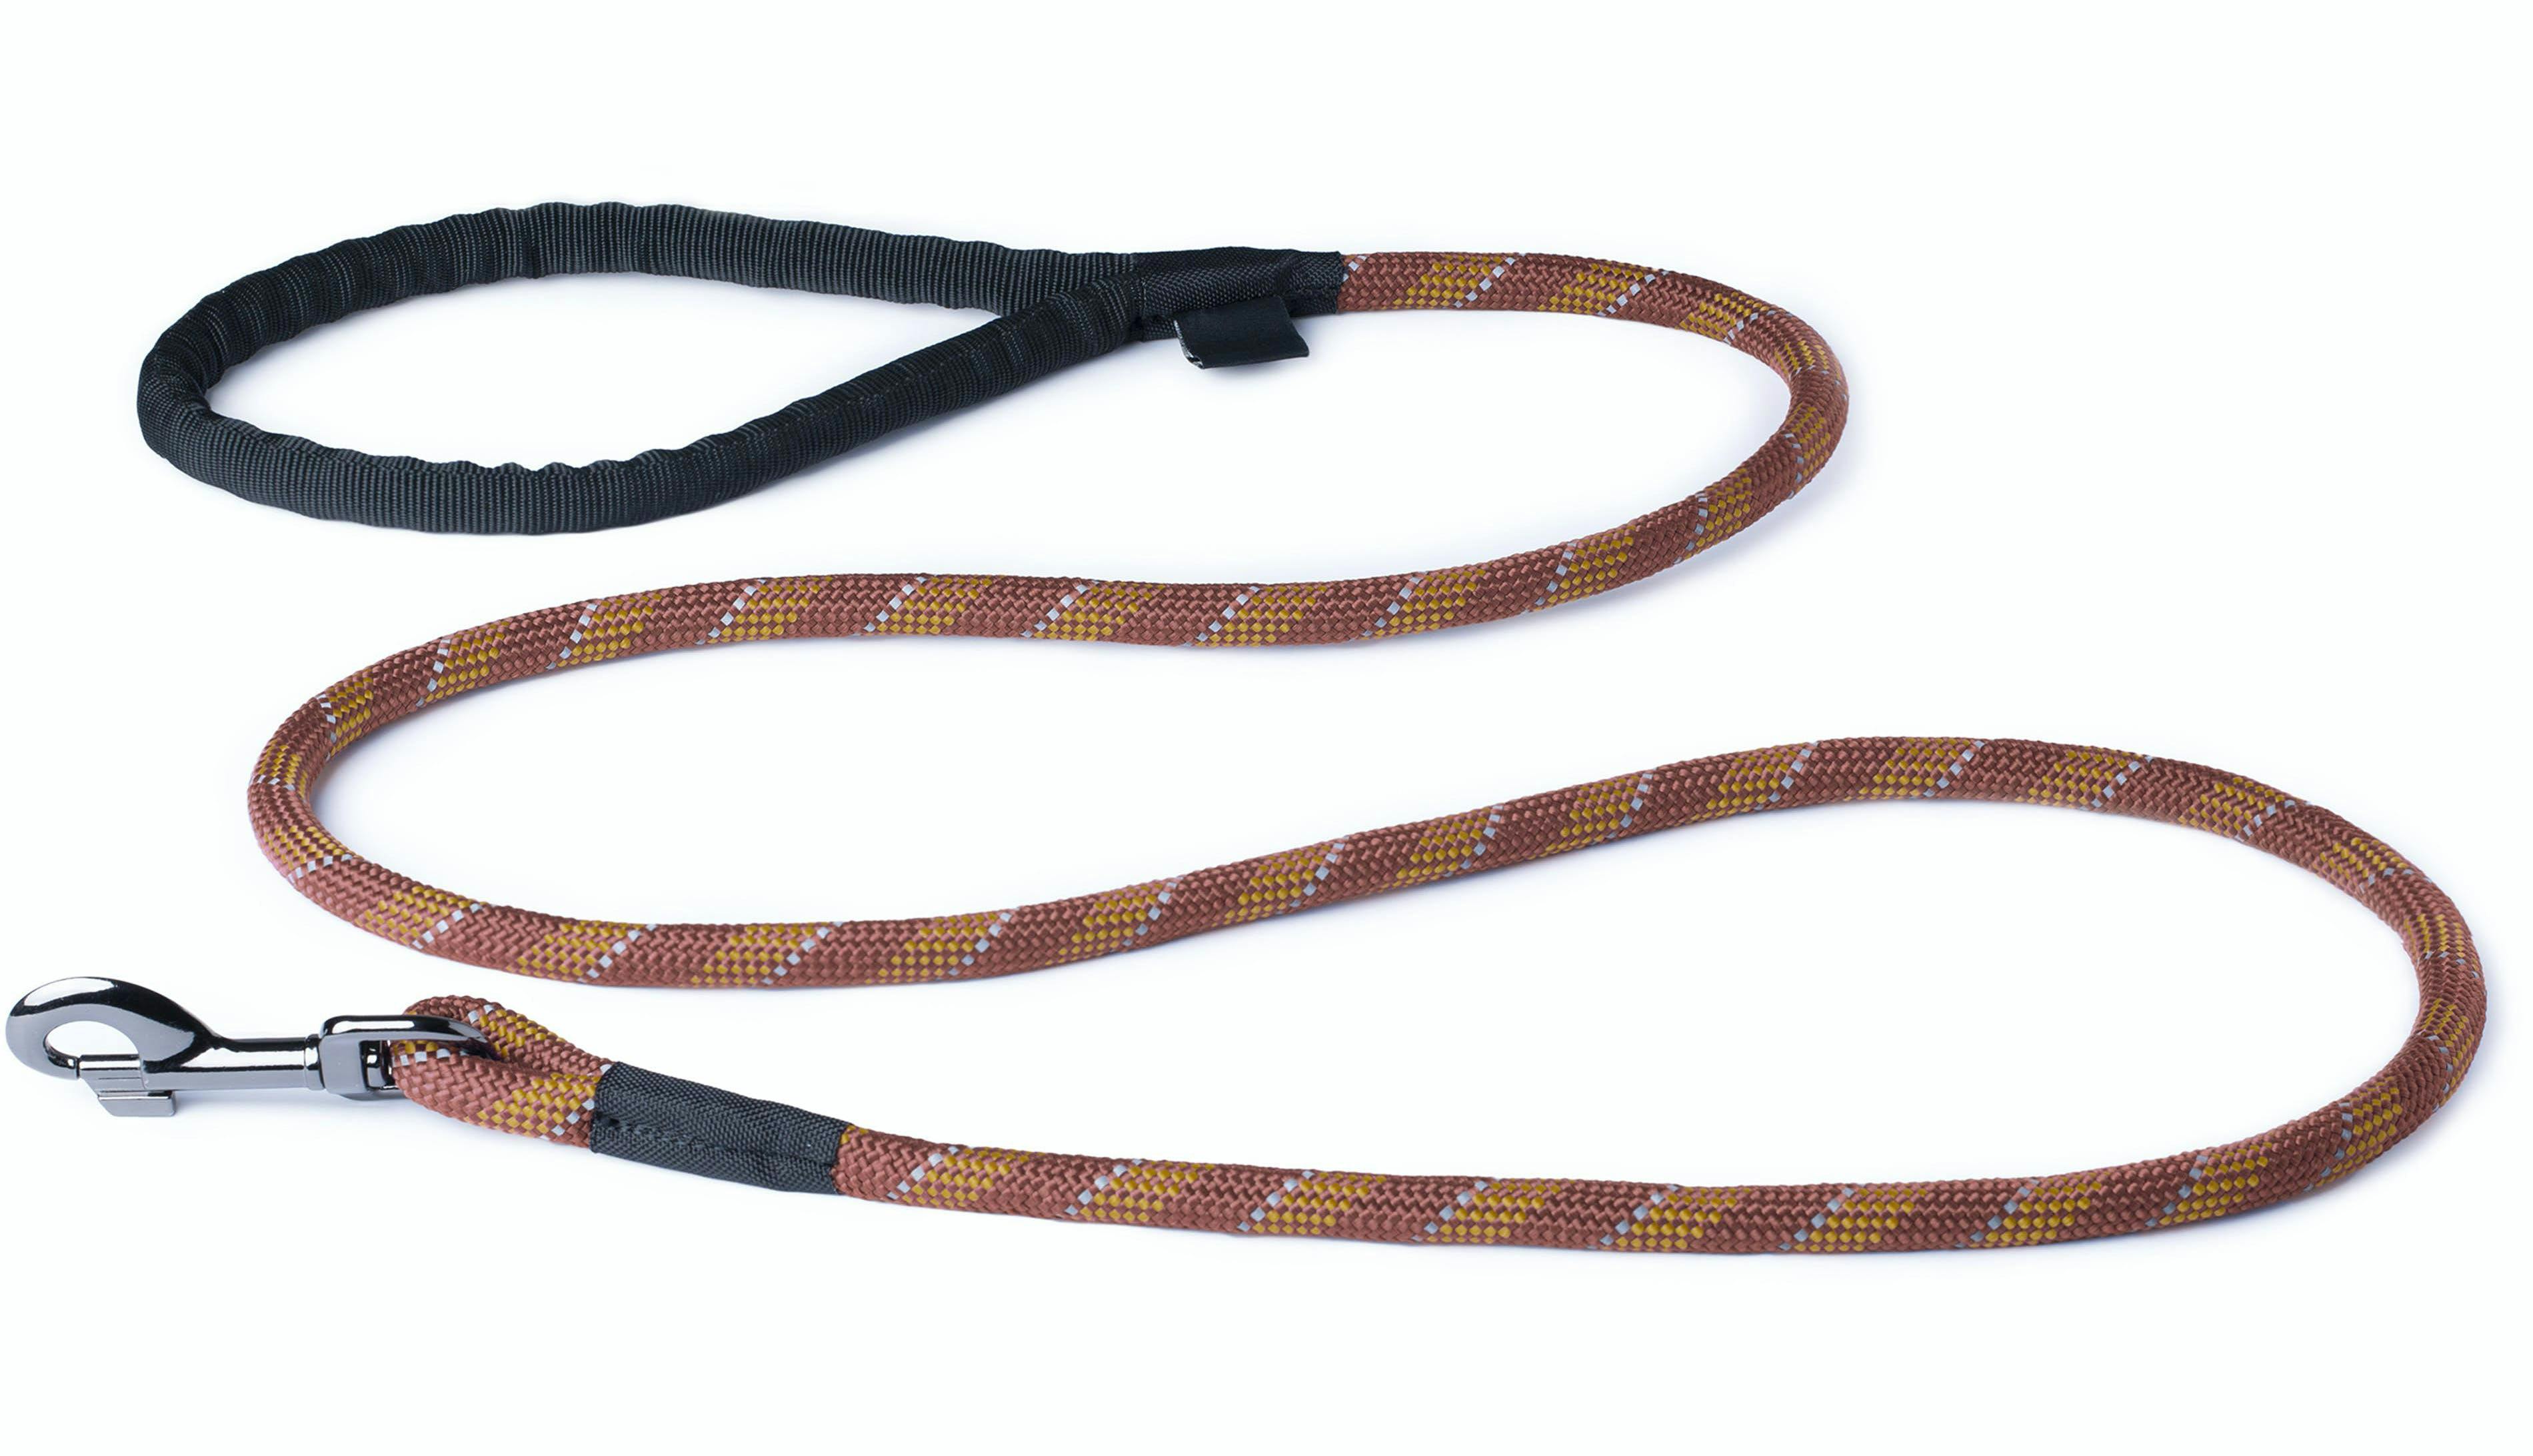 Canadian Canine Trapper Leash